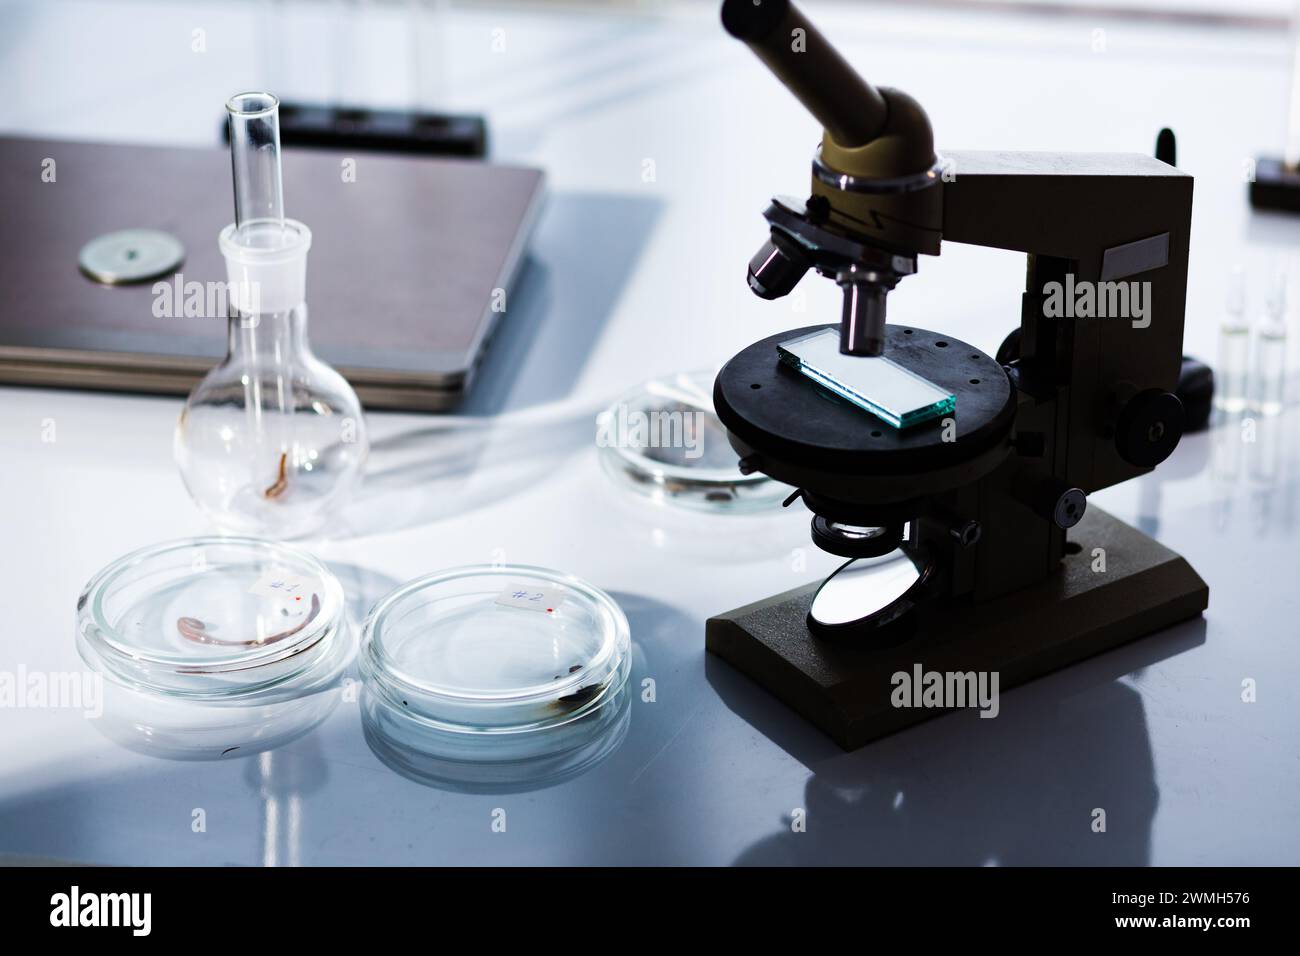 A set of equipment for research work on the study of insects. Stock Photo